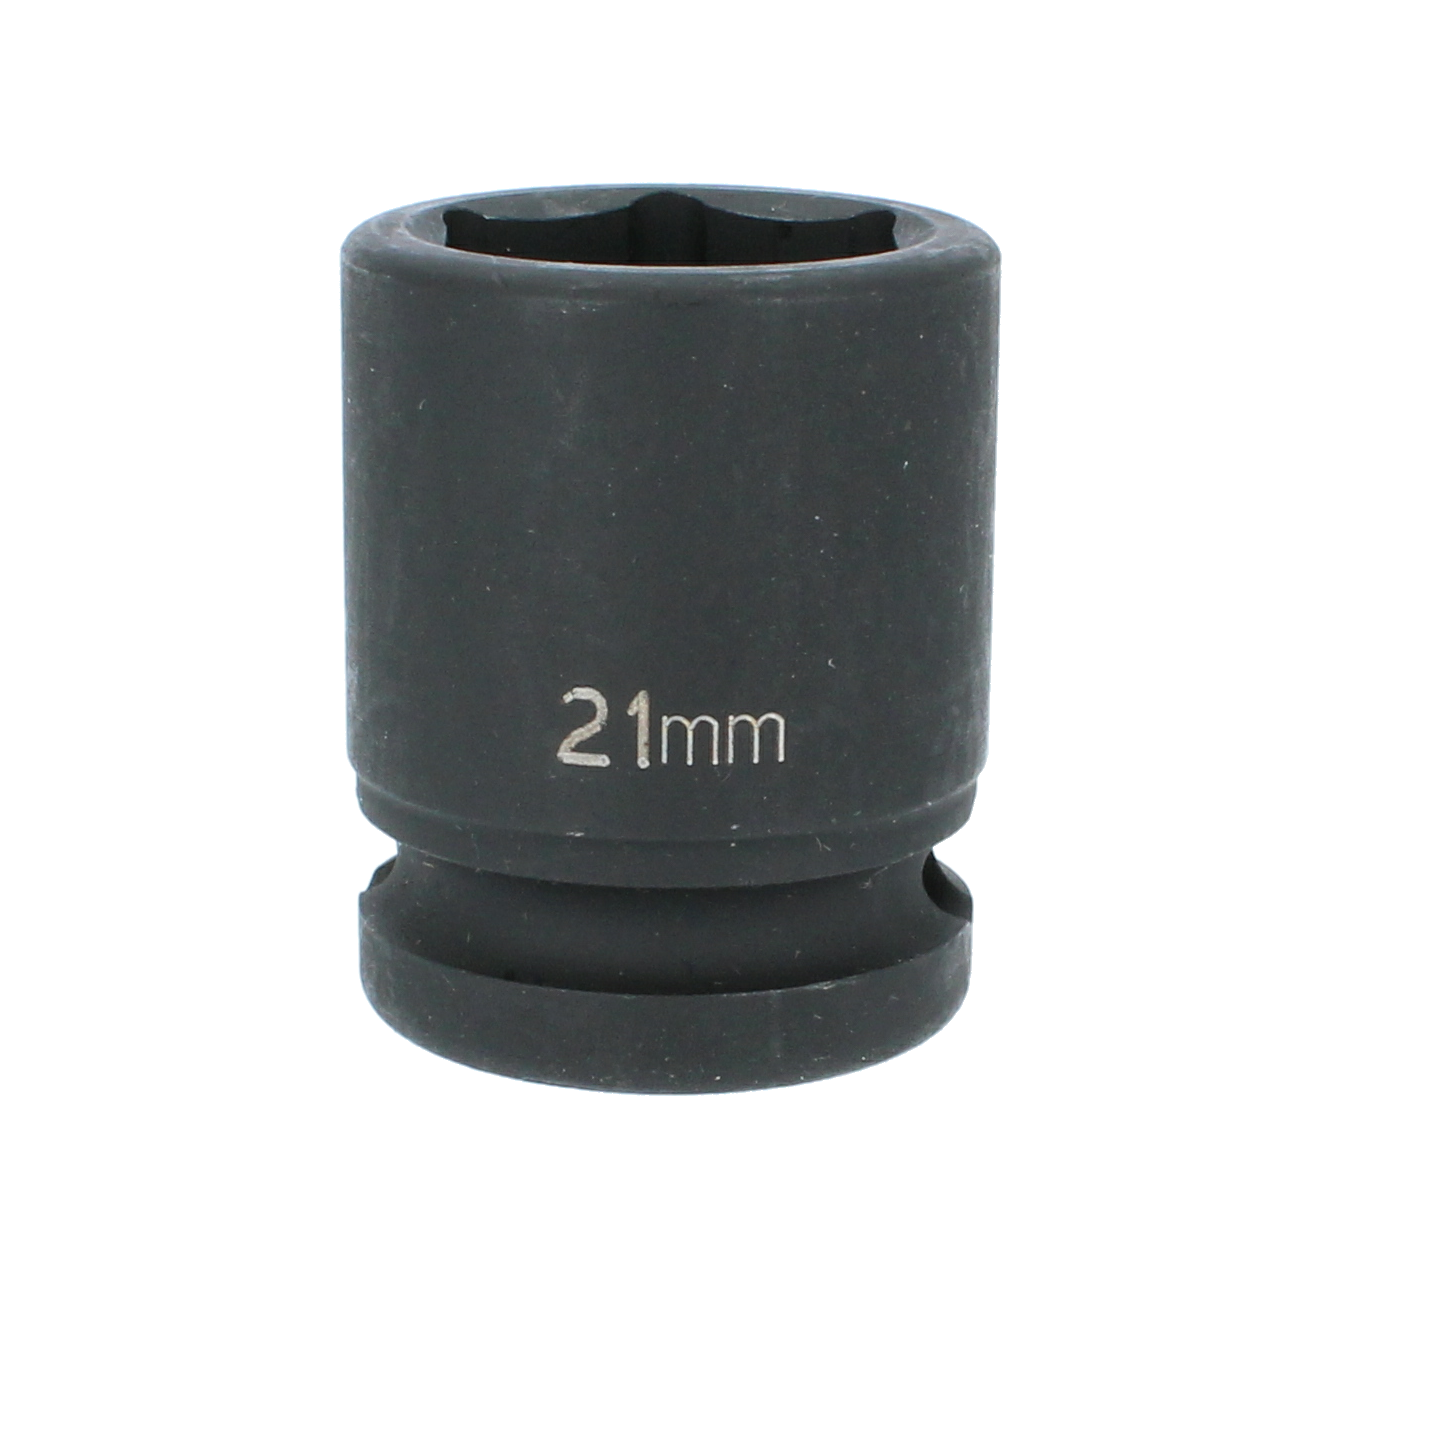 krafttop magnettop 24mm x 1/2"